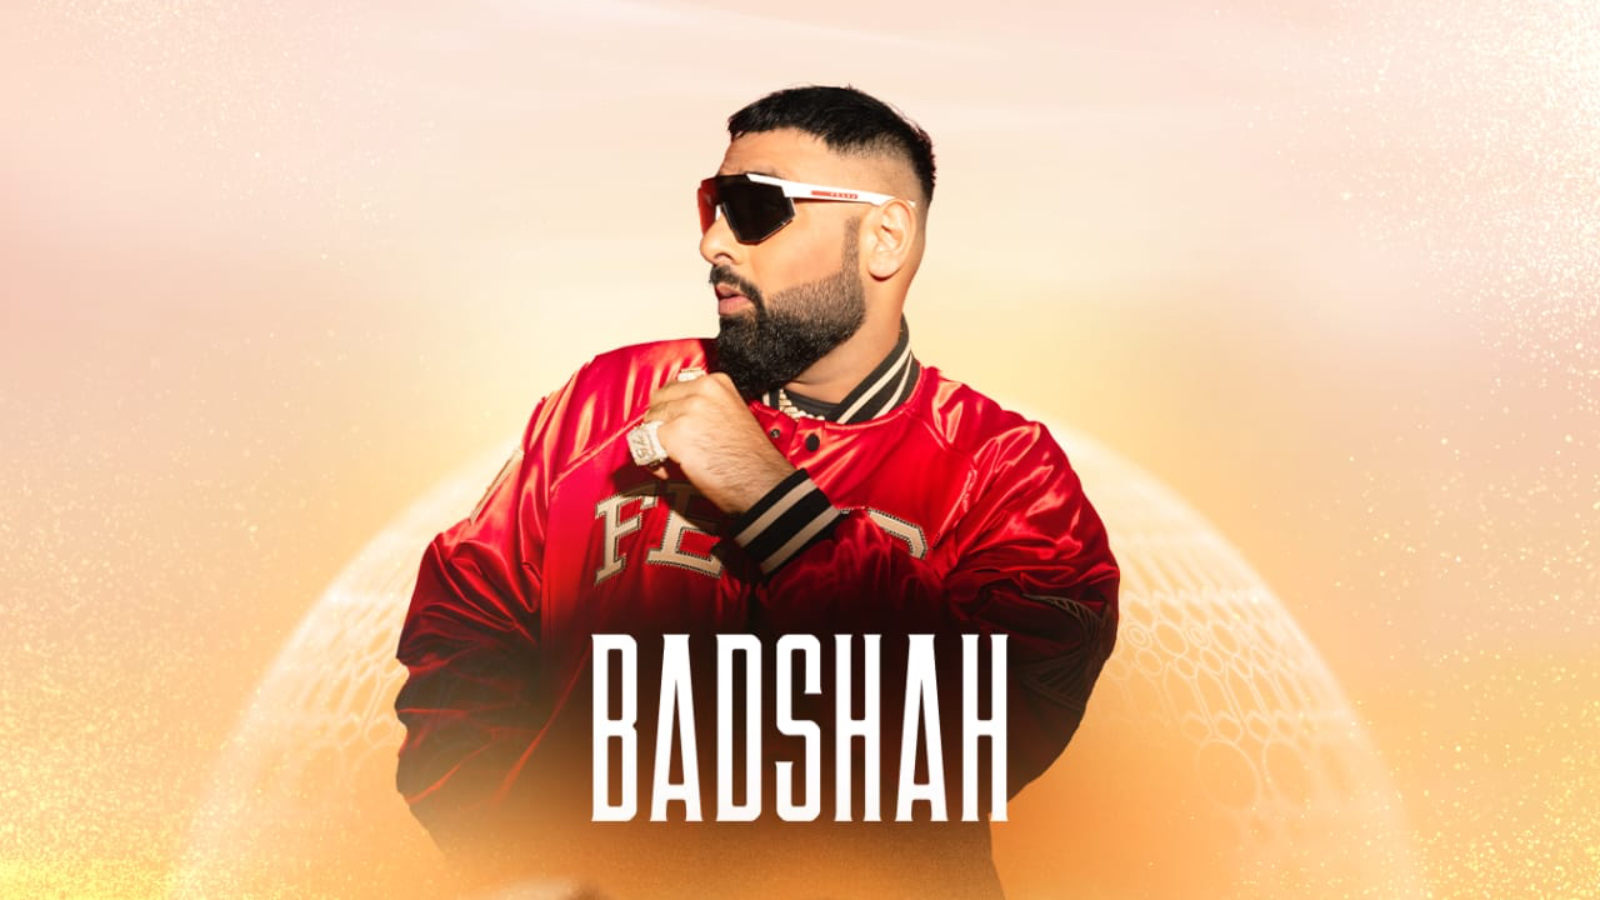 android, rapper badshah to debut at untold, dubai; becomes first indian artist to perform at the festival